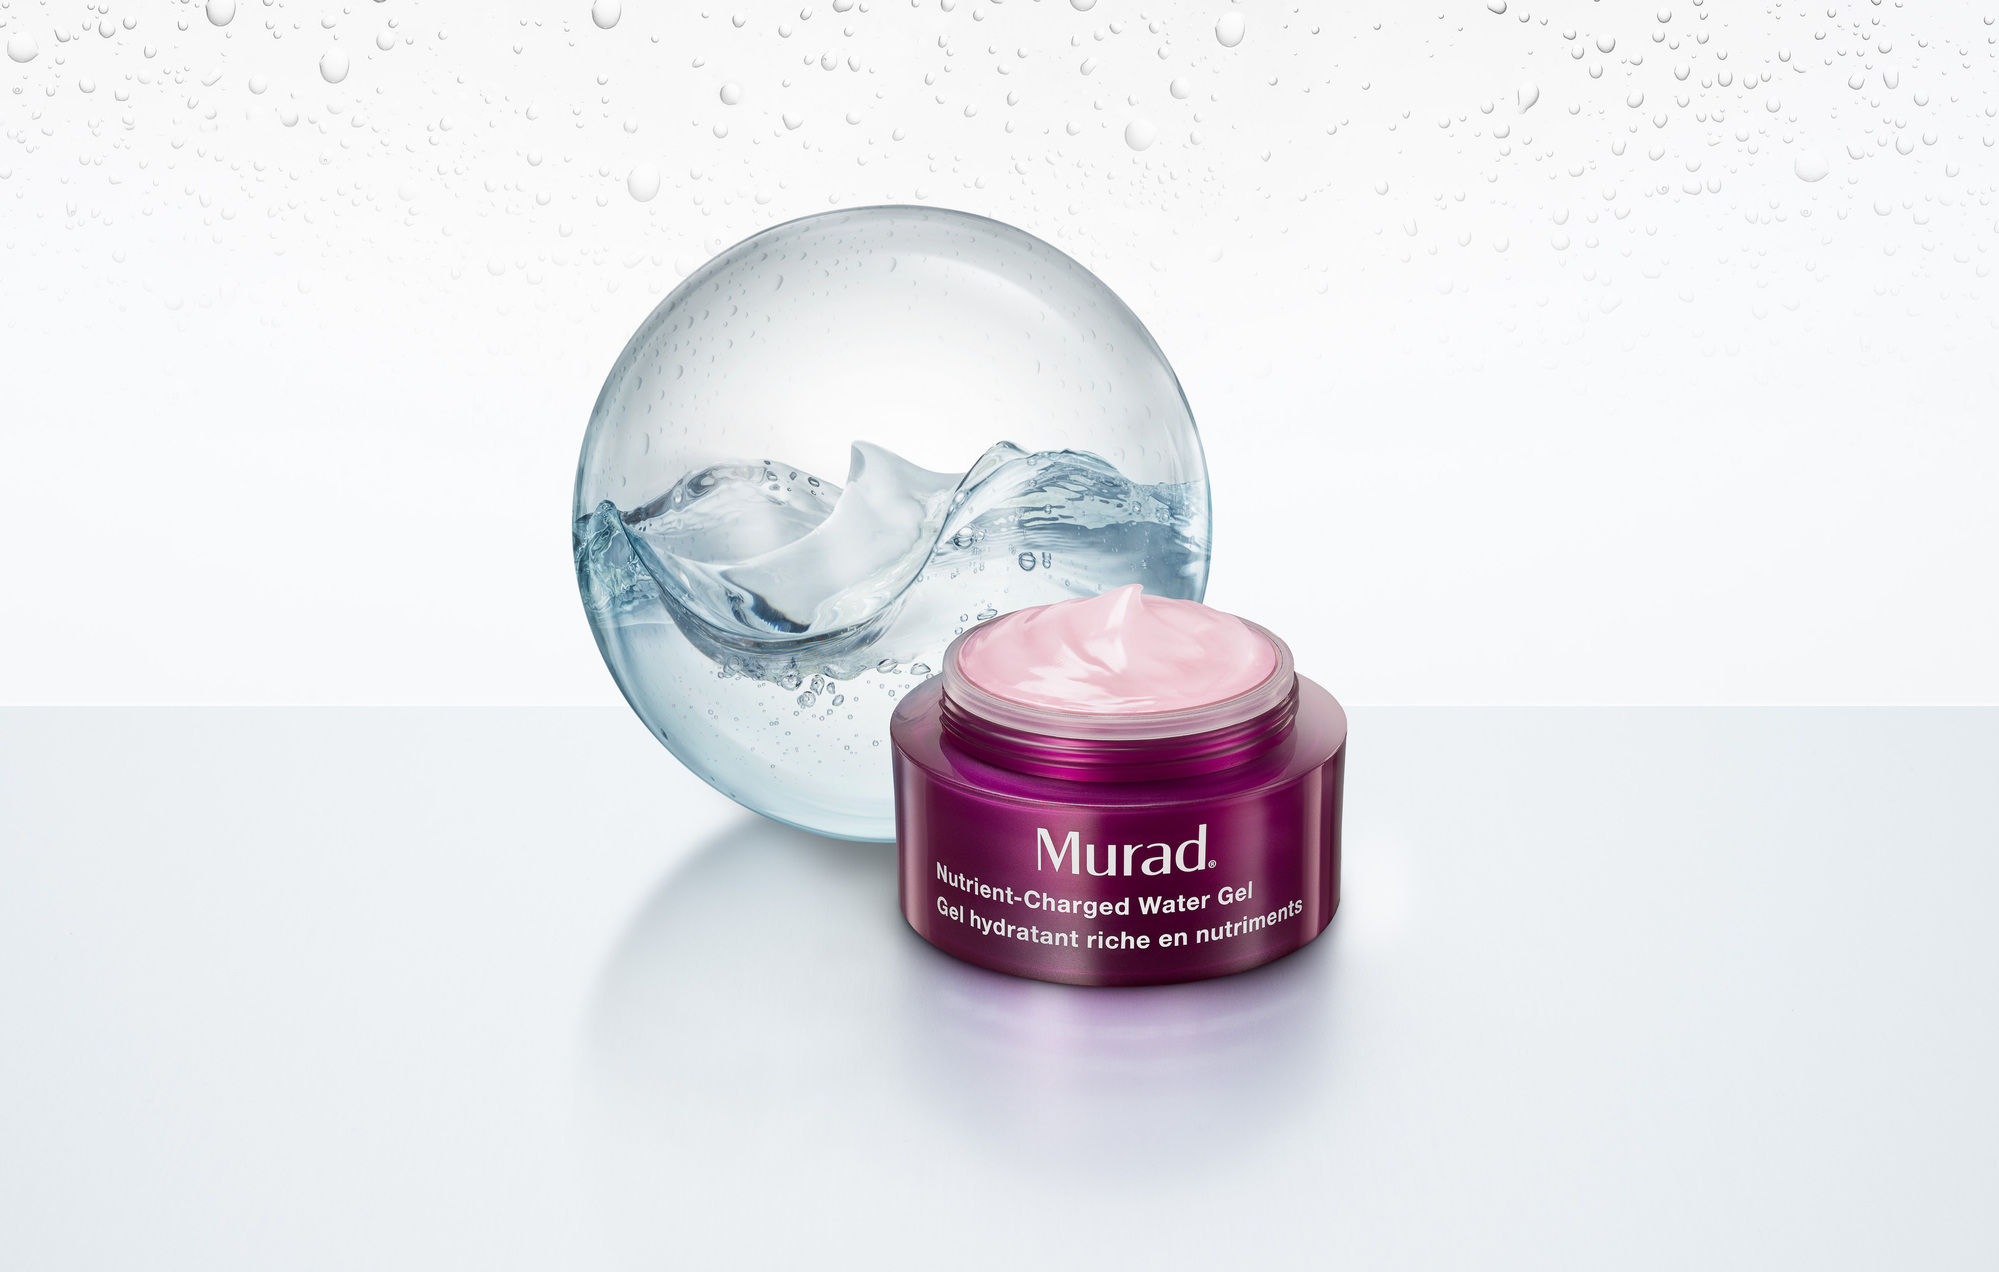 Murad cosmetics and beauty photography by commercial, product & advertising photographer Timothy Hogan in the Los Angeles Studio